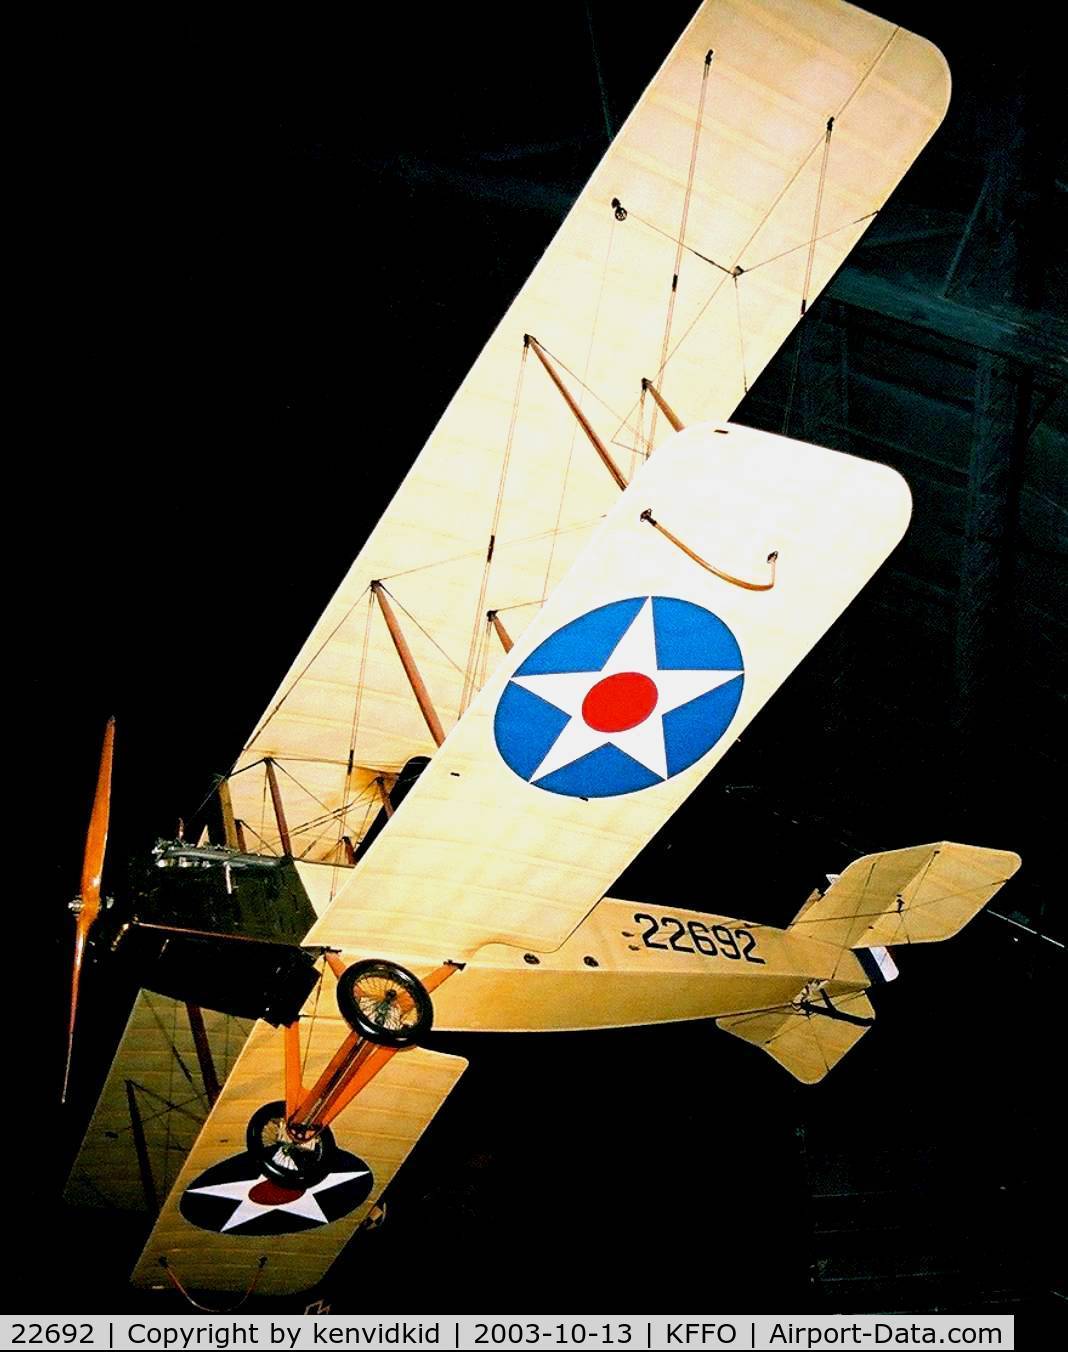 22692, 1917 Standard J-1 C/N 1141, At The Museum of the United States Air Force Dayton Ohio.